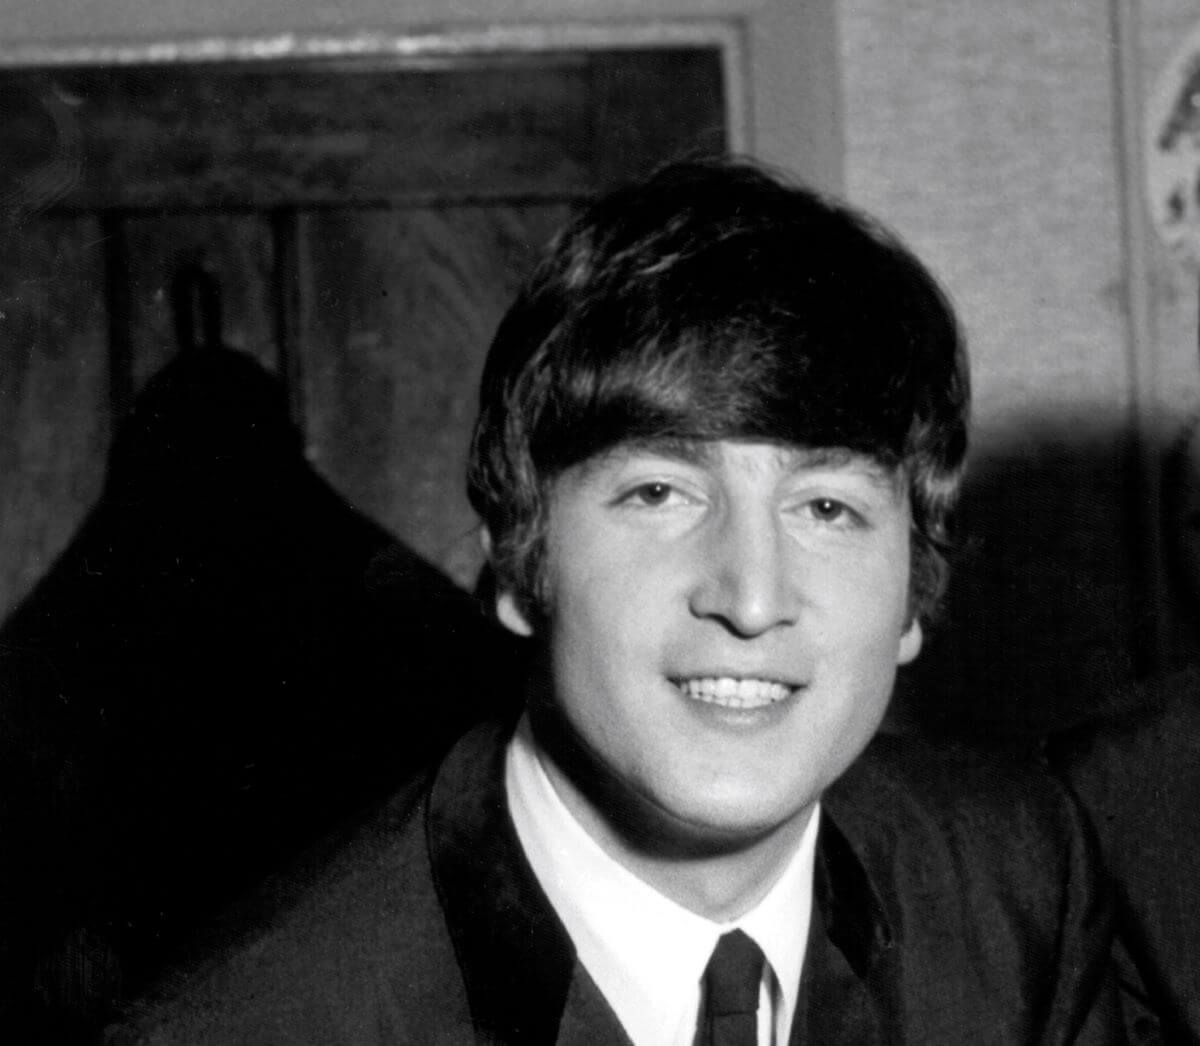 A black and white picture of John Lennon wearing a suit and smiling.